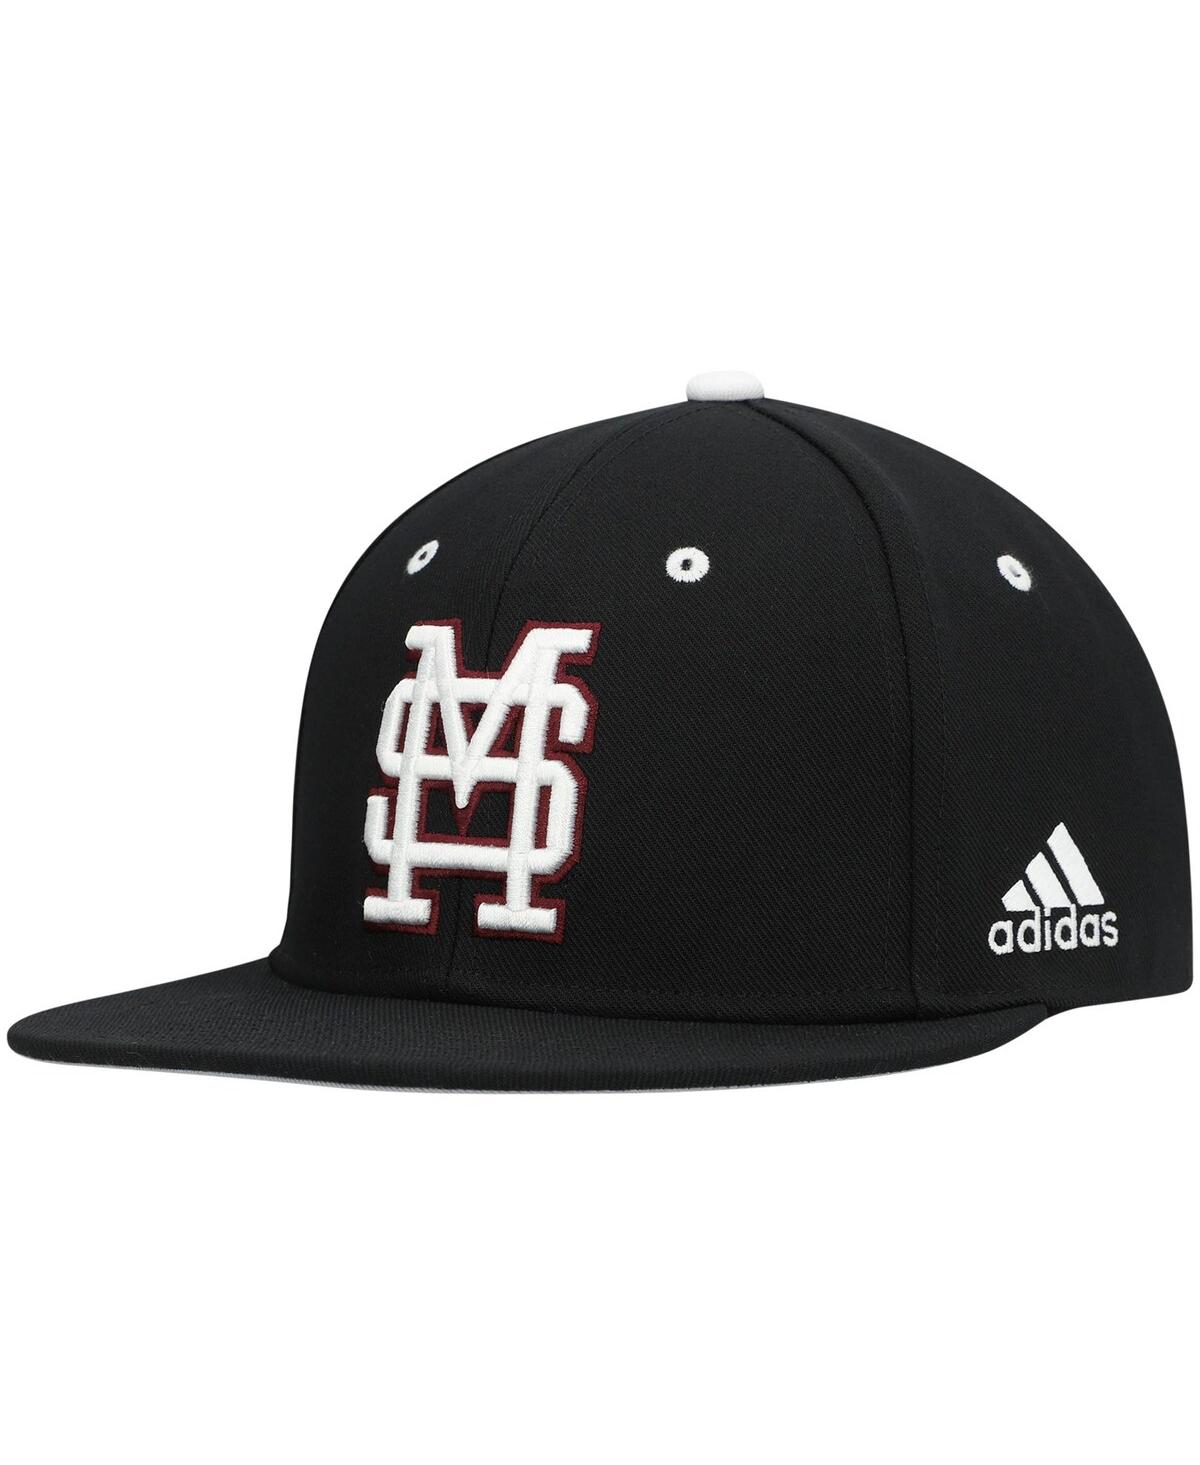 ADIDAS ORIGINALS MEN'S ADIDAS BLACK MISSISSIPPI STATE BULLDOGS ON-FIELD BASEBALL FITTED HAT